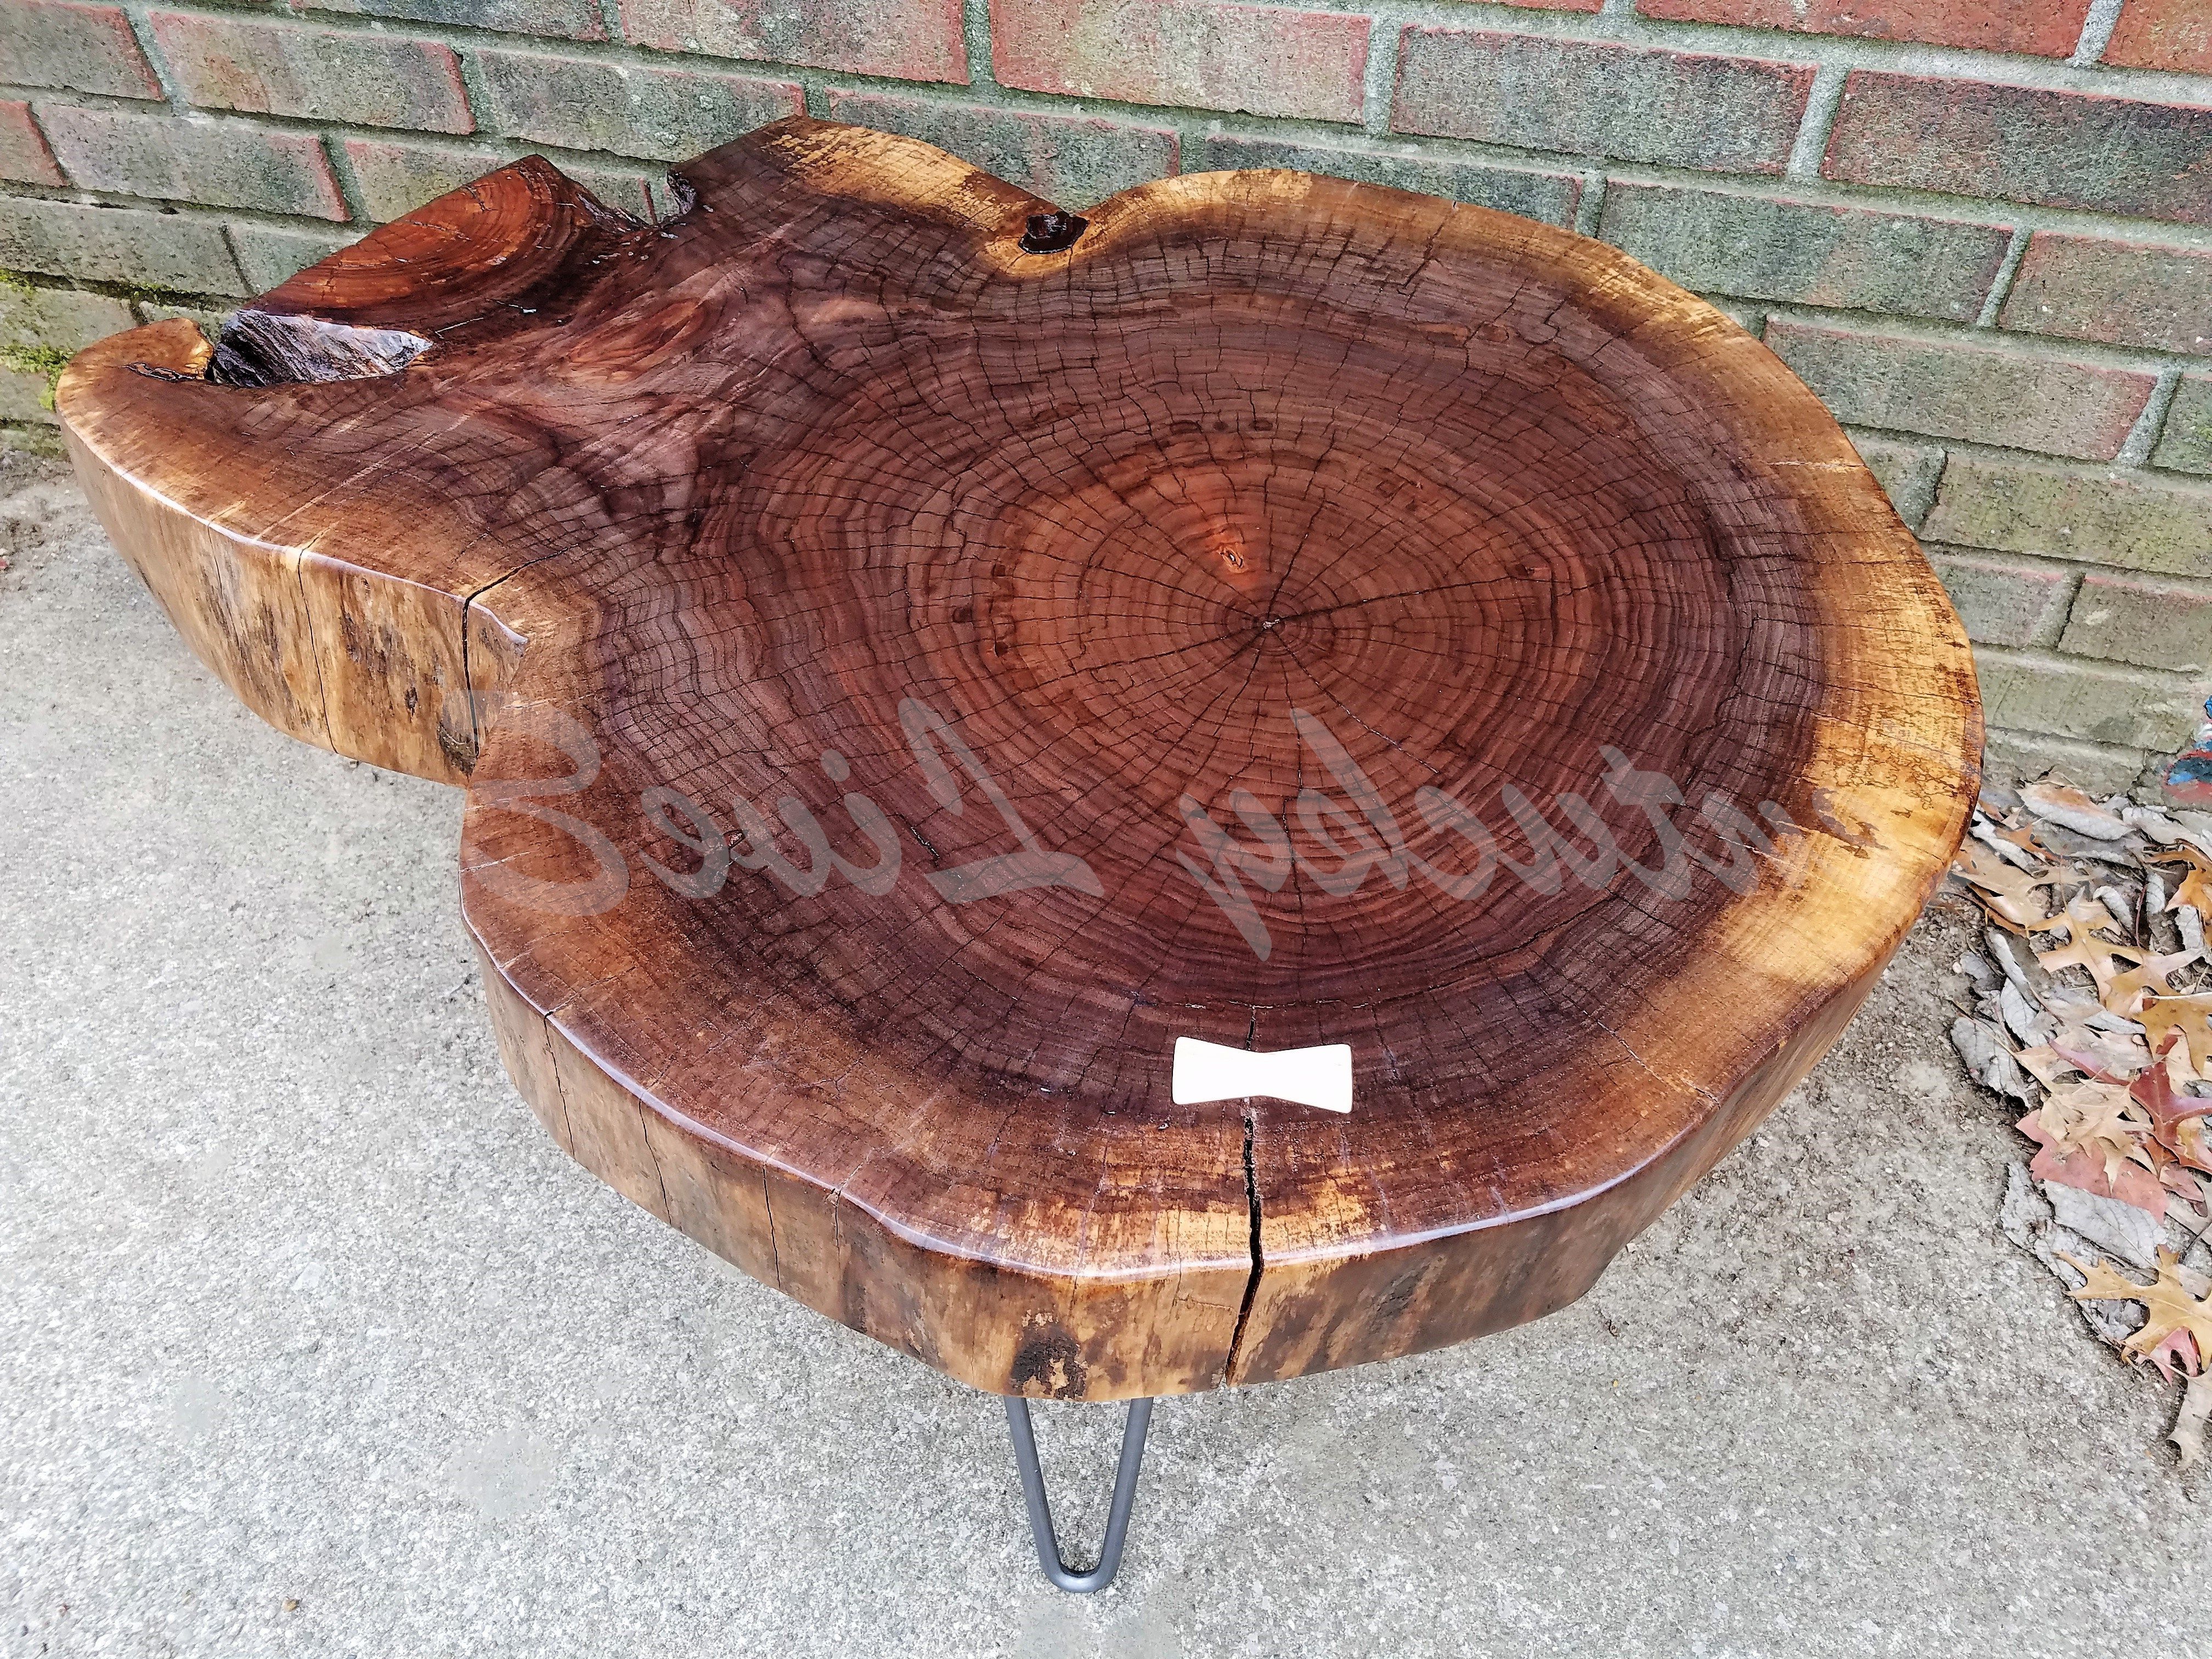 Widely Used Sliced Trunk Coffee Tables Inside Custom Live Edge Coffee Table  Round Table  Tree Slice  Log Table (View 15 of 20)